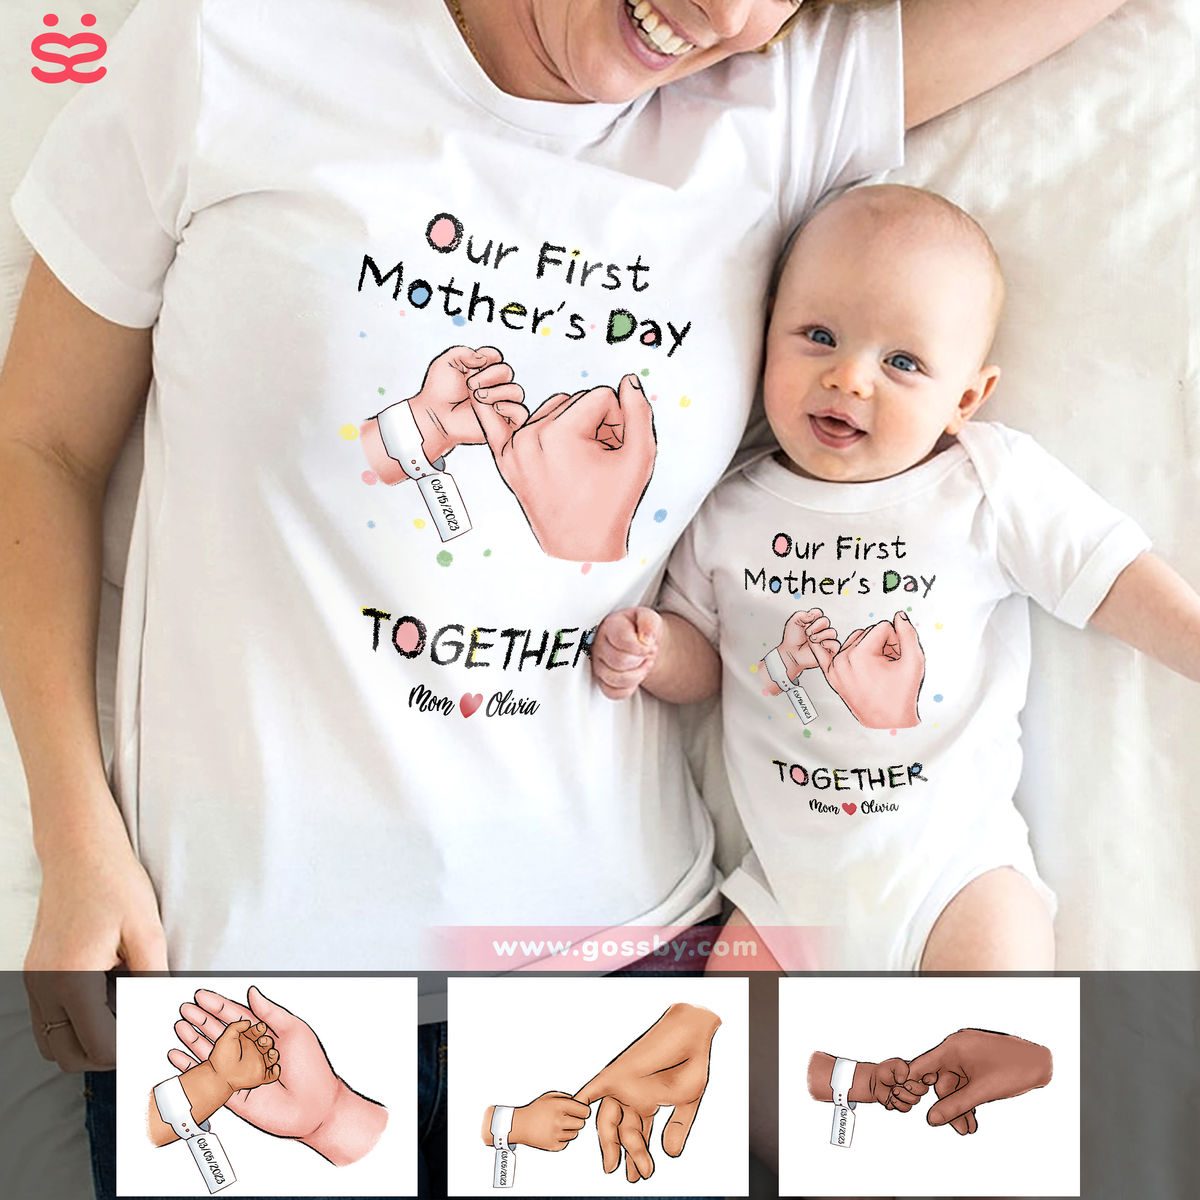 Our First Mother's Day Matching Outfit (Onesie and TShirt Set) - Mother and Child Hand